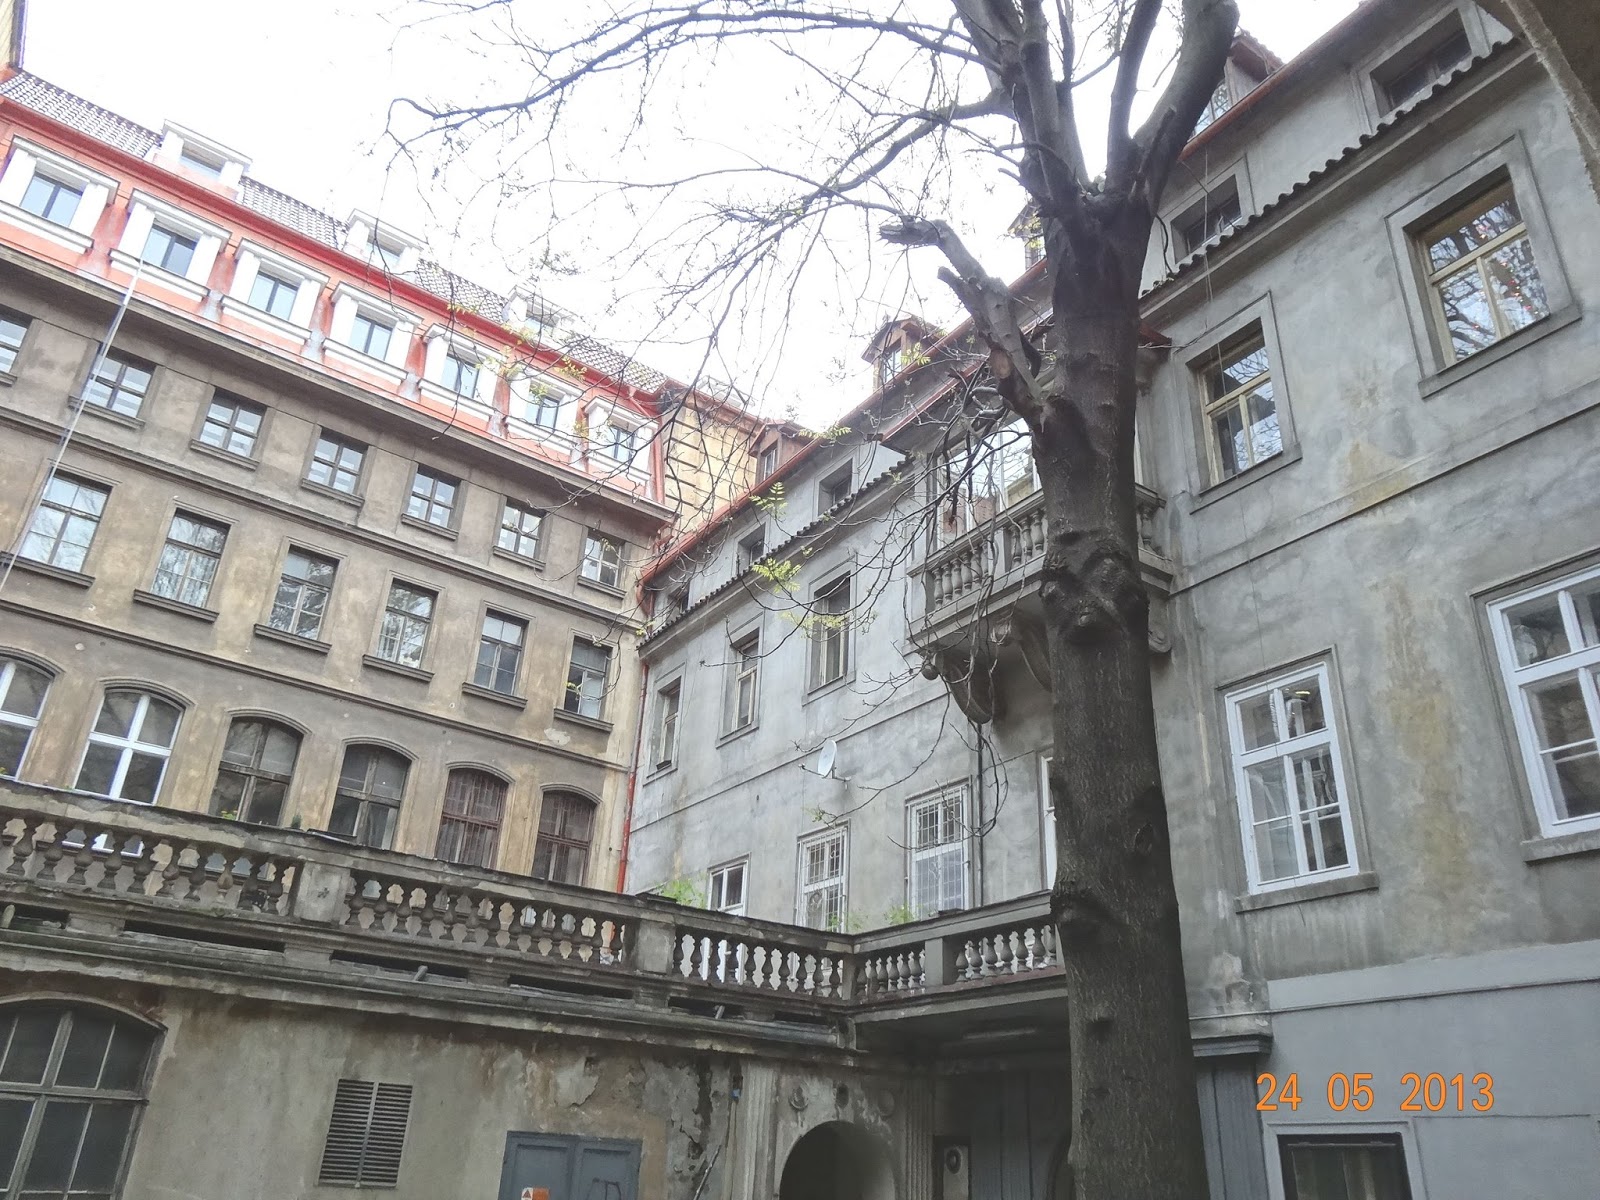 The courtyard forms a part of alleyway Spalena Stret - Opatovicka Street